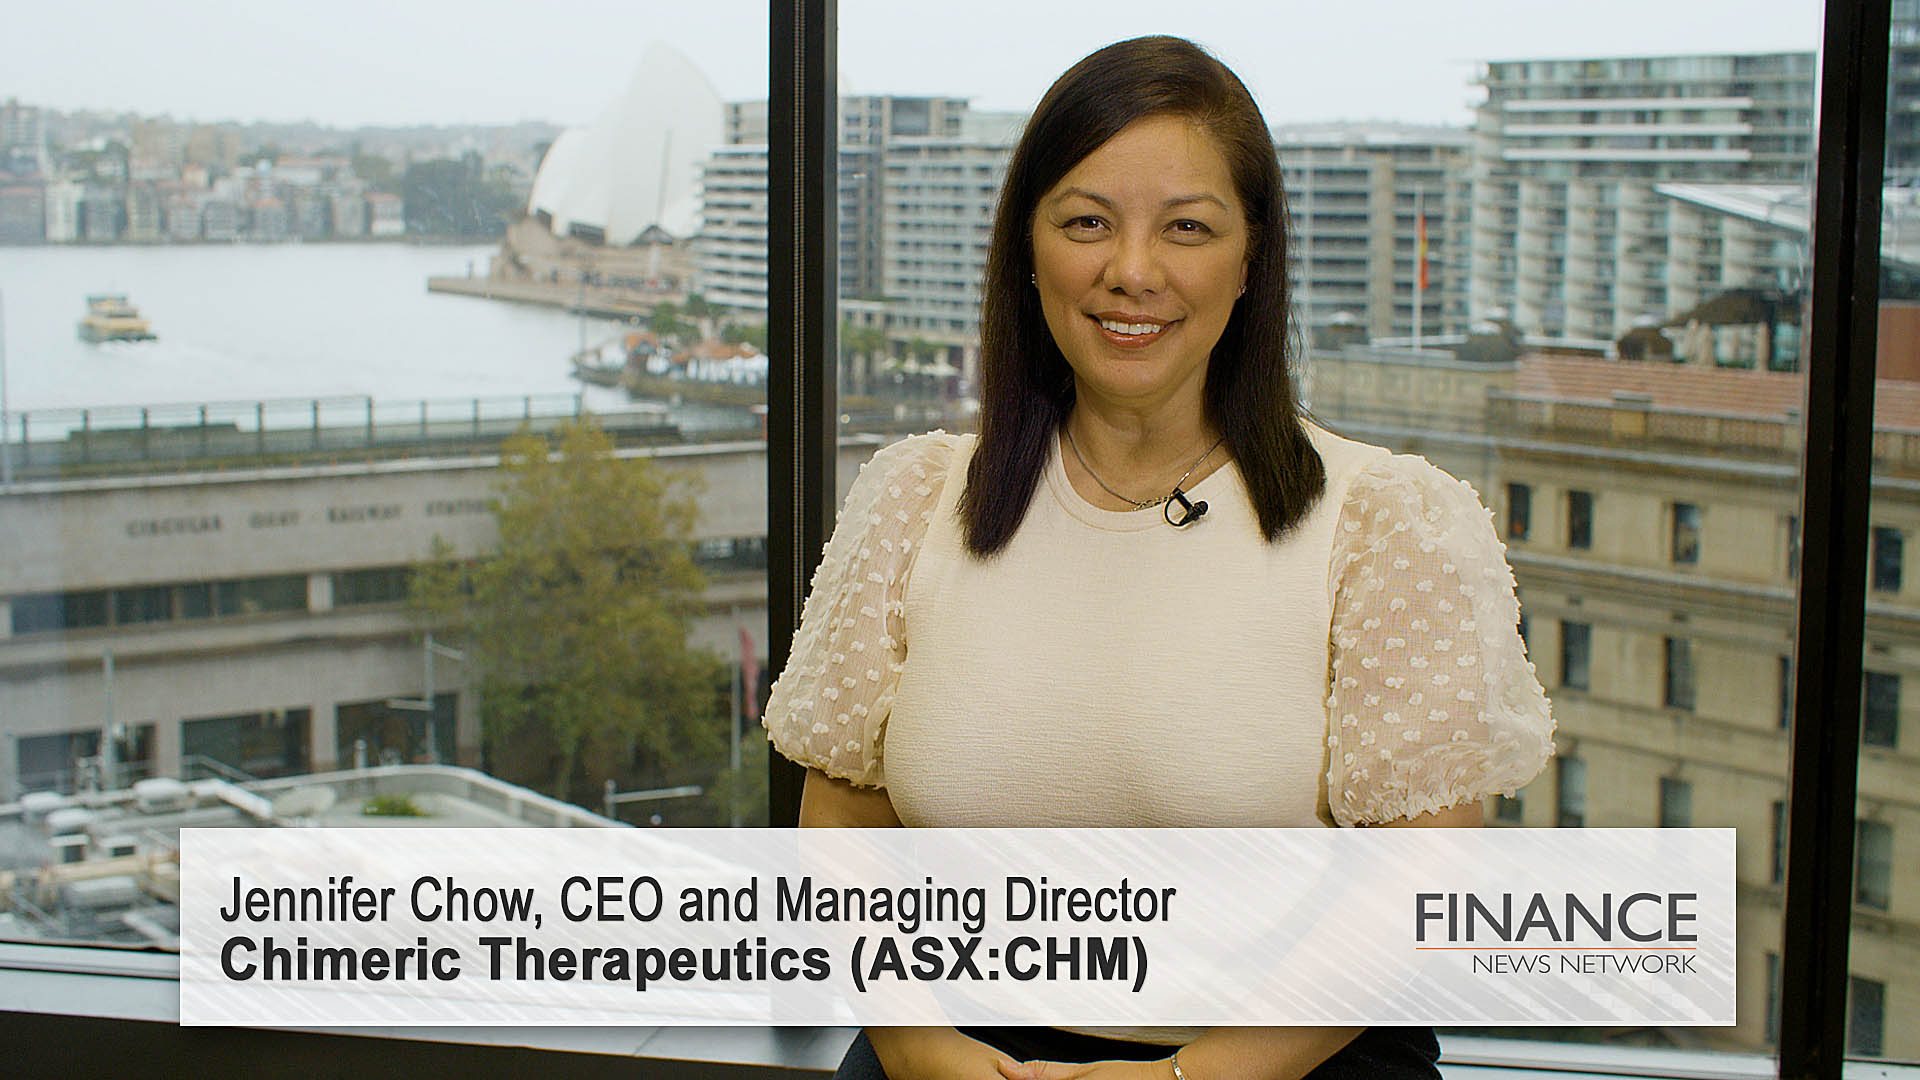 Chimeric Therapeutics (ASX:CHM) expands cancer trials